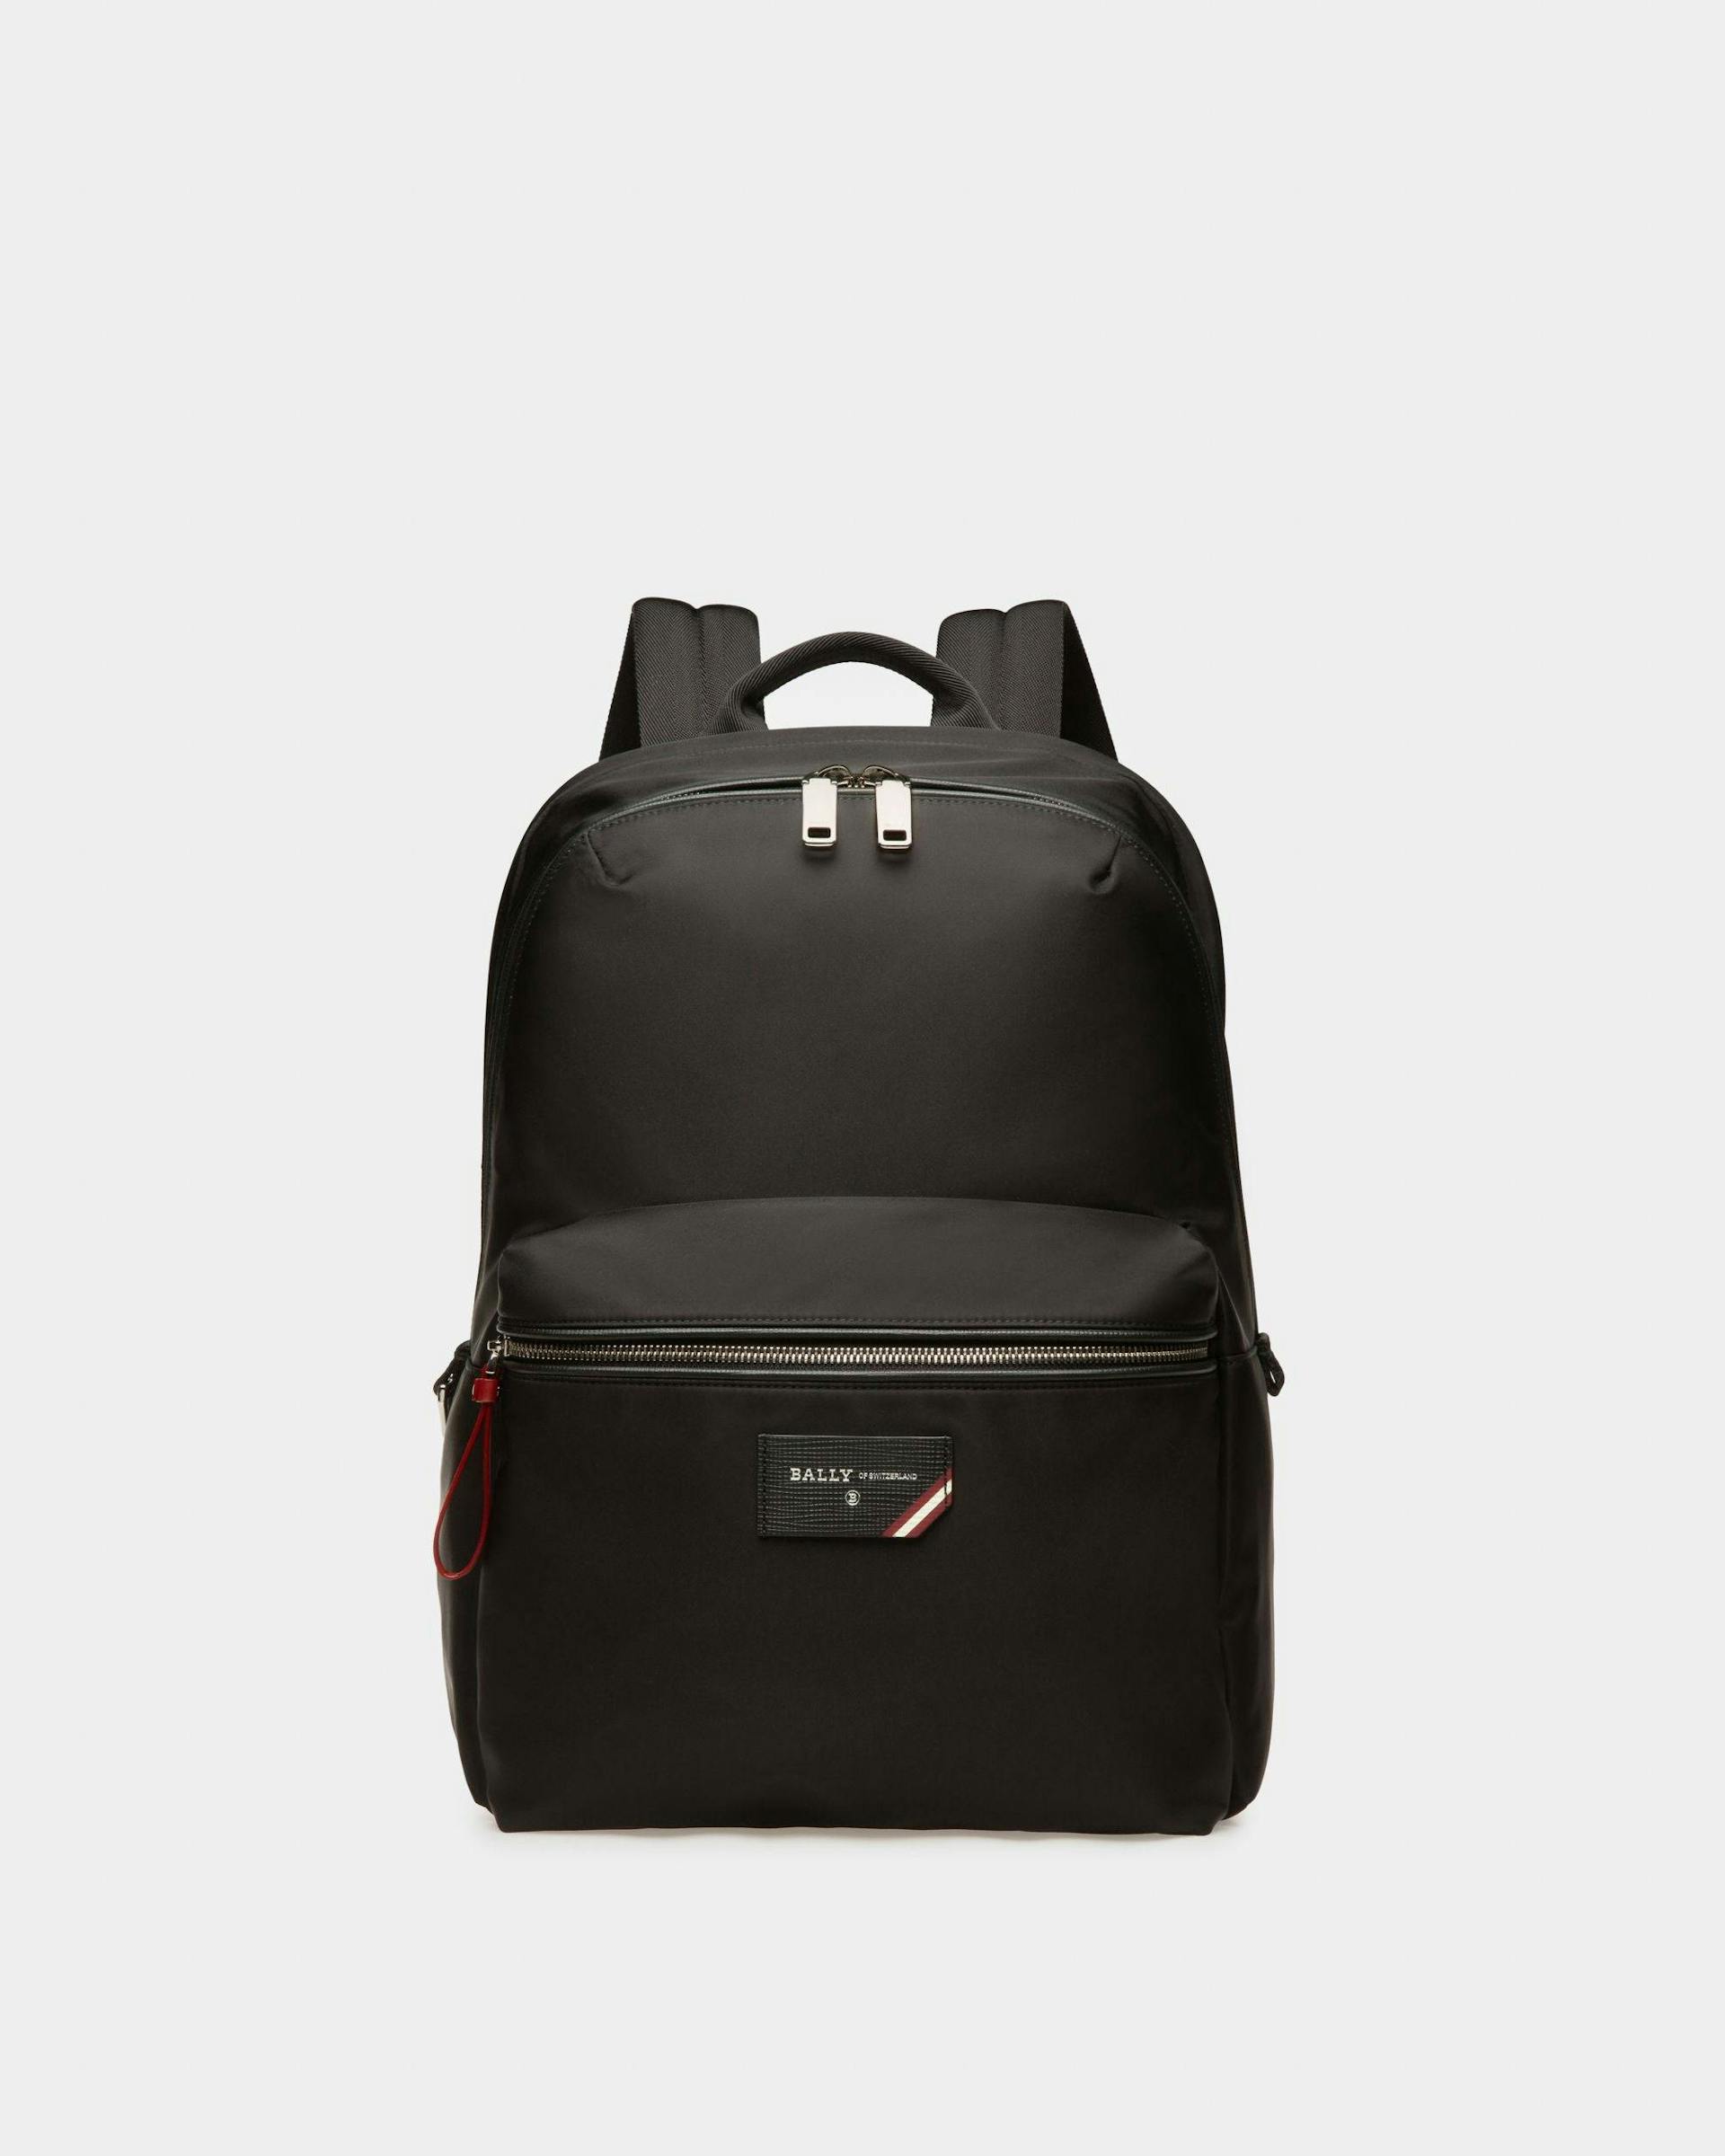 Men's Explore Backpack In Black Leather And Nylon | Bally | Still Life Front